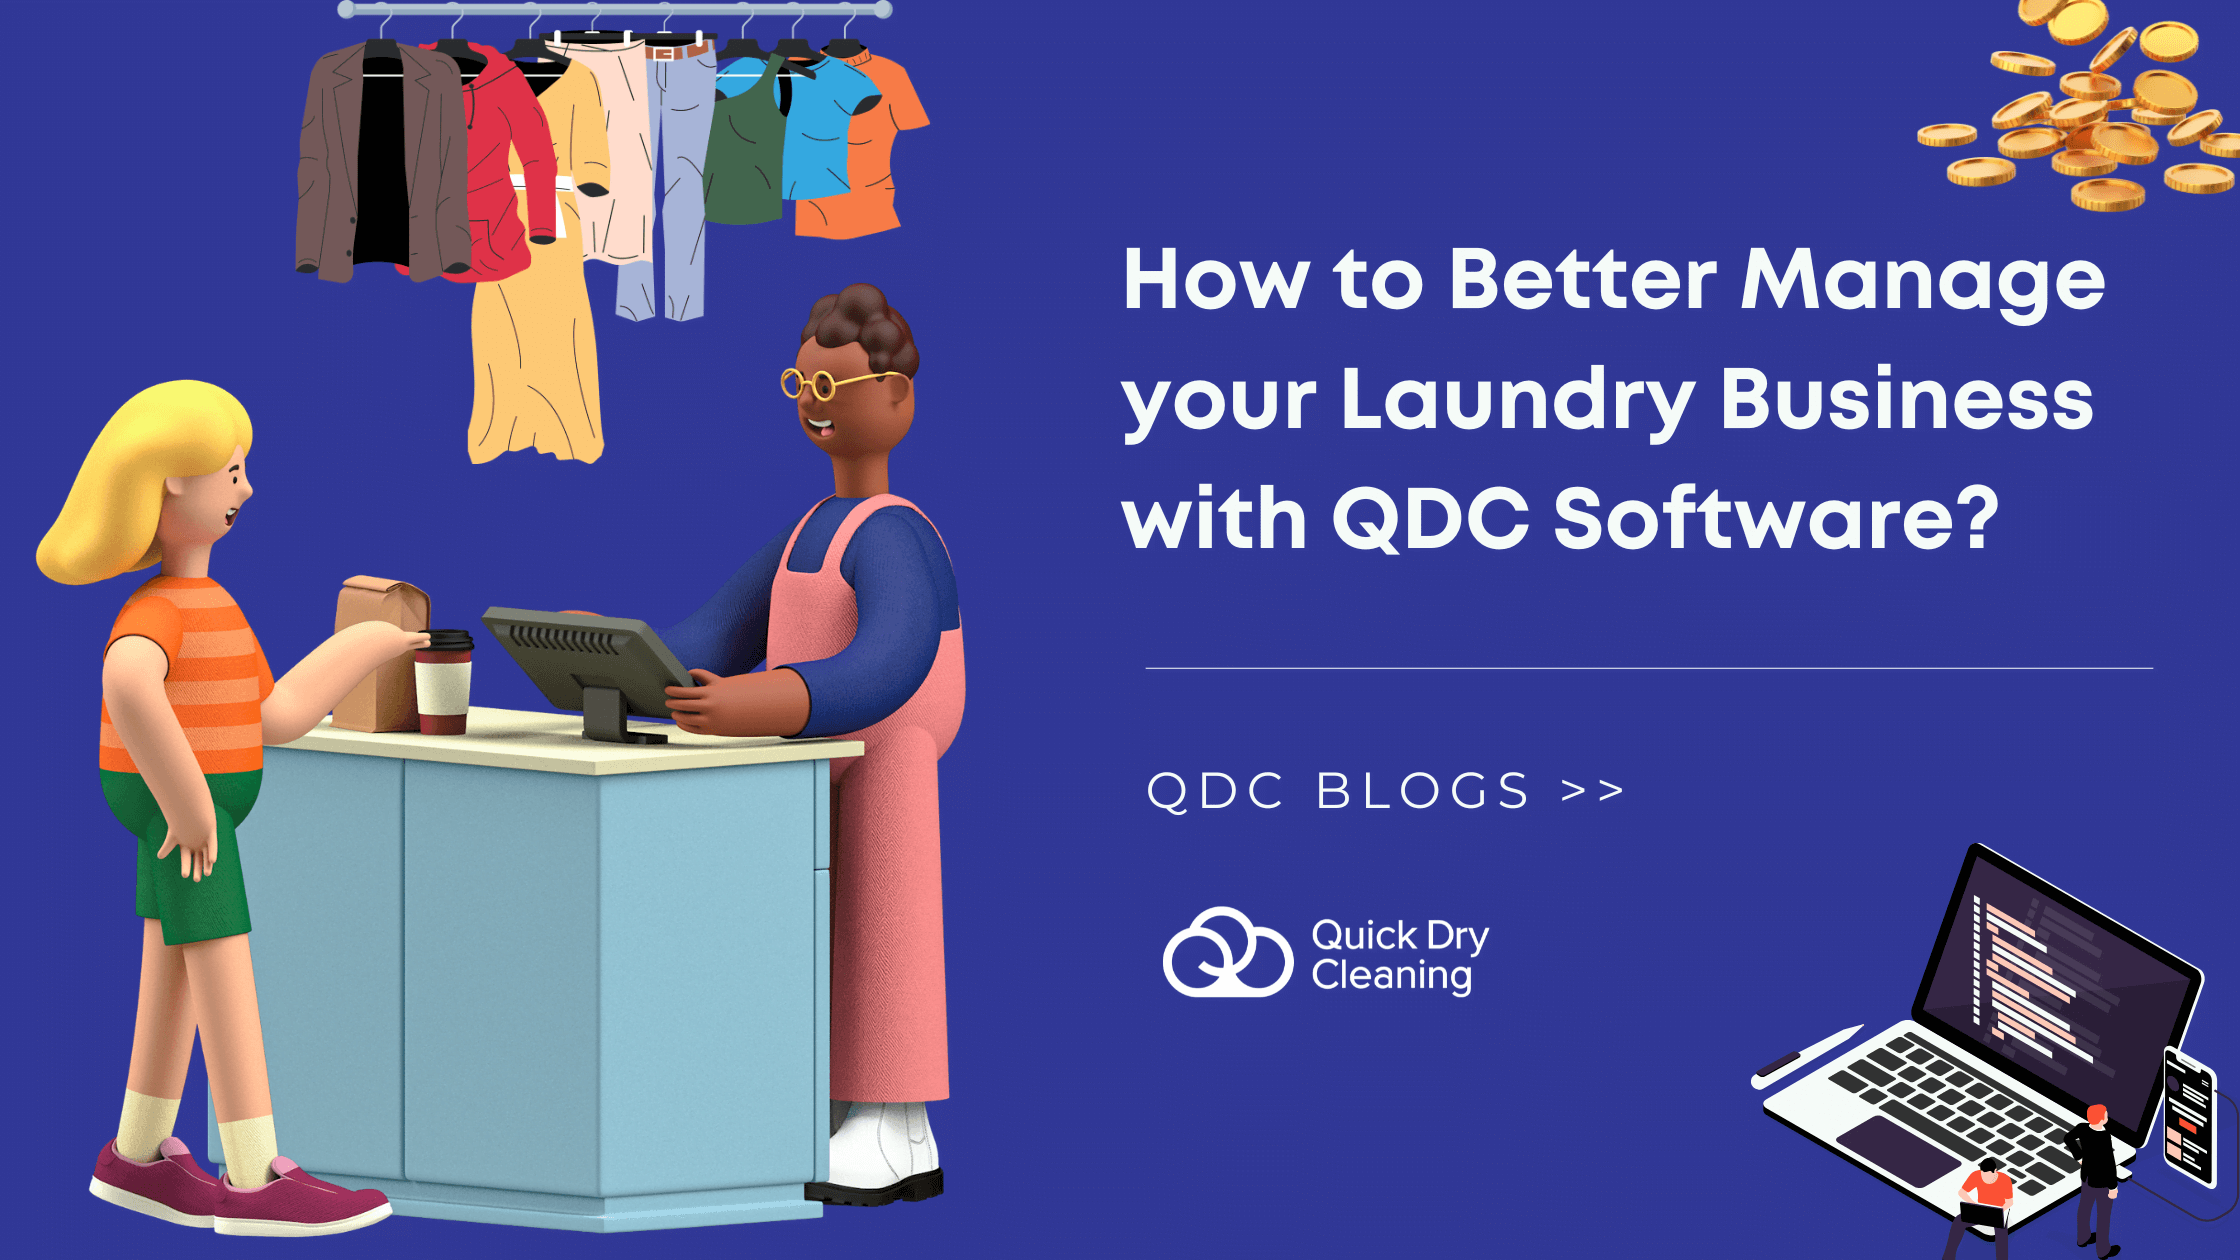 Manage your Laundry Business